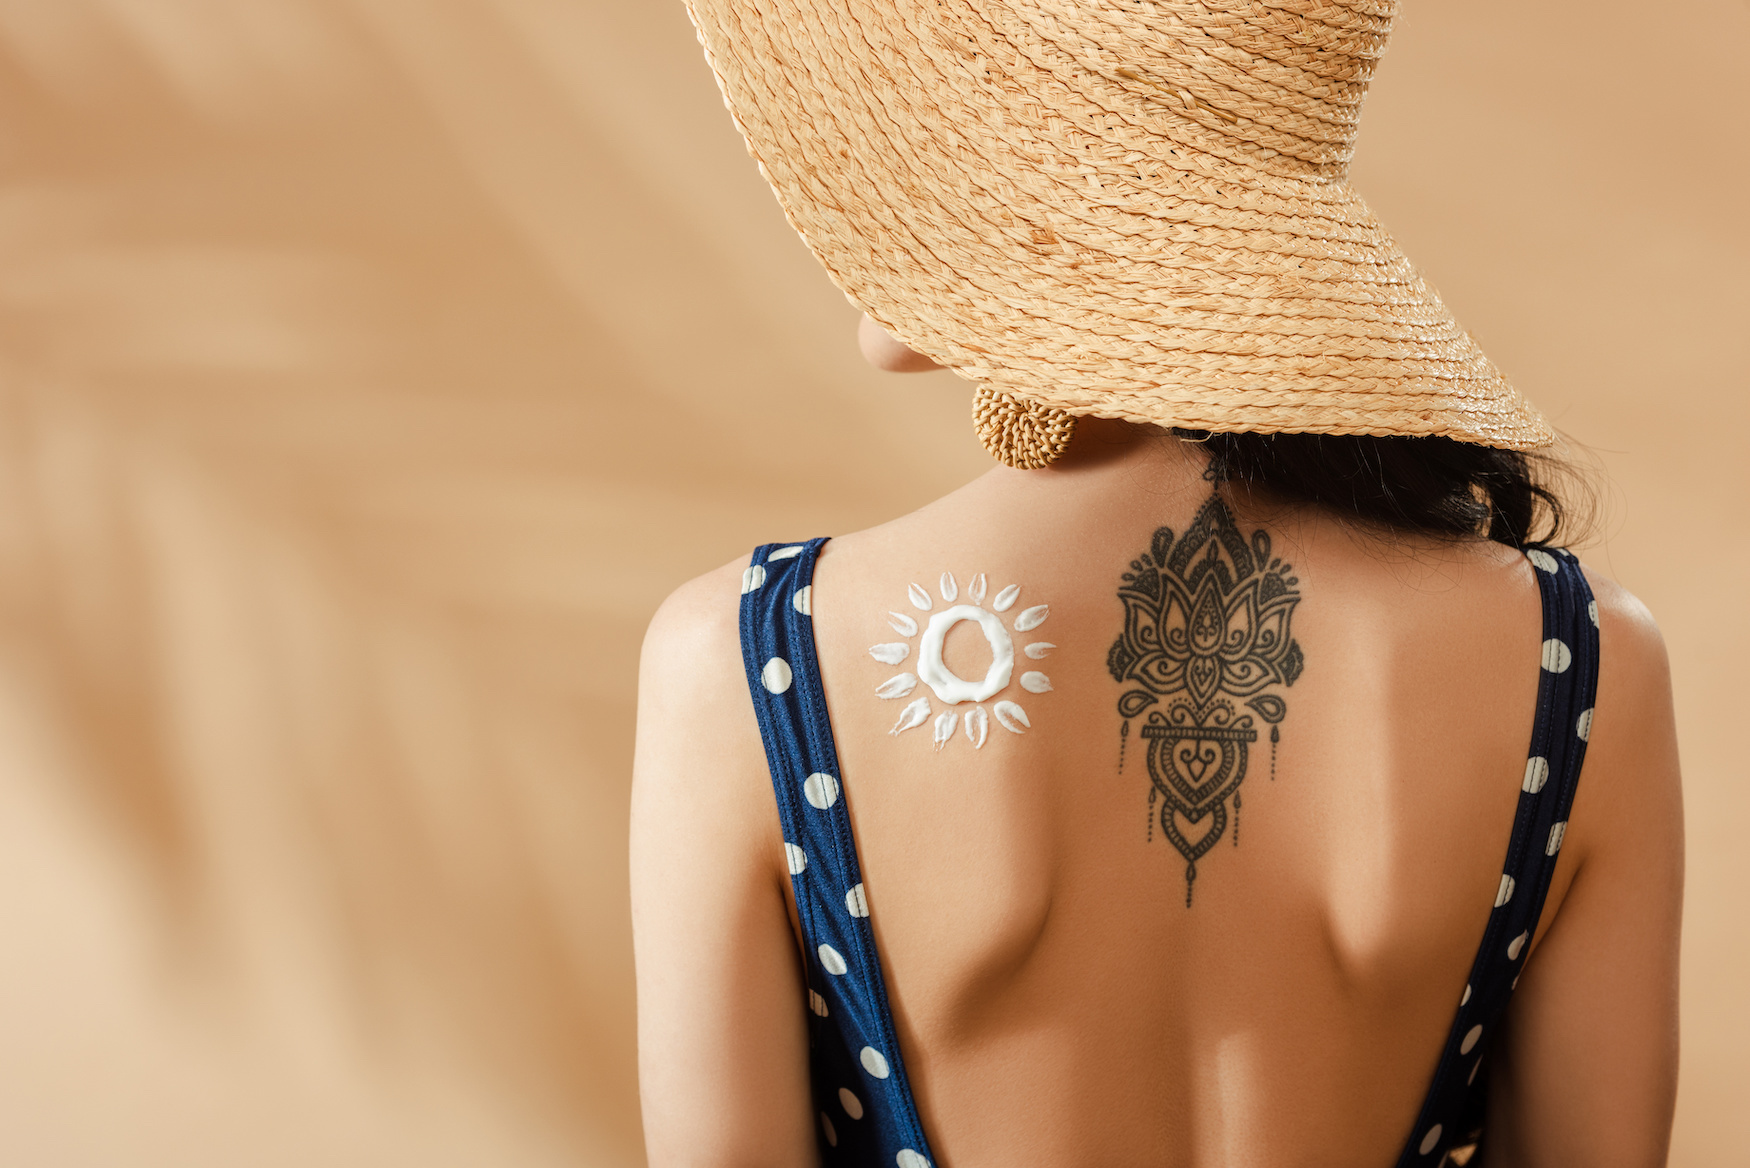 A woman with a tattoo and sunscreen on her back